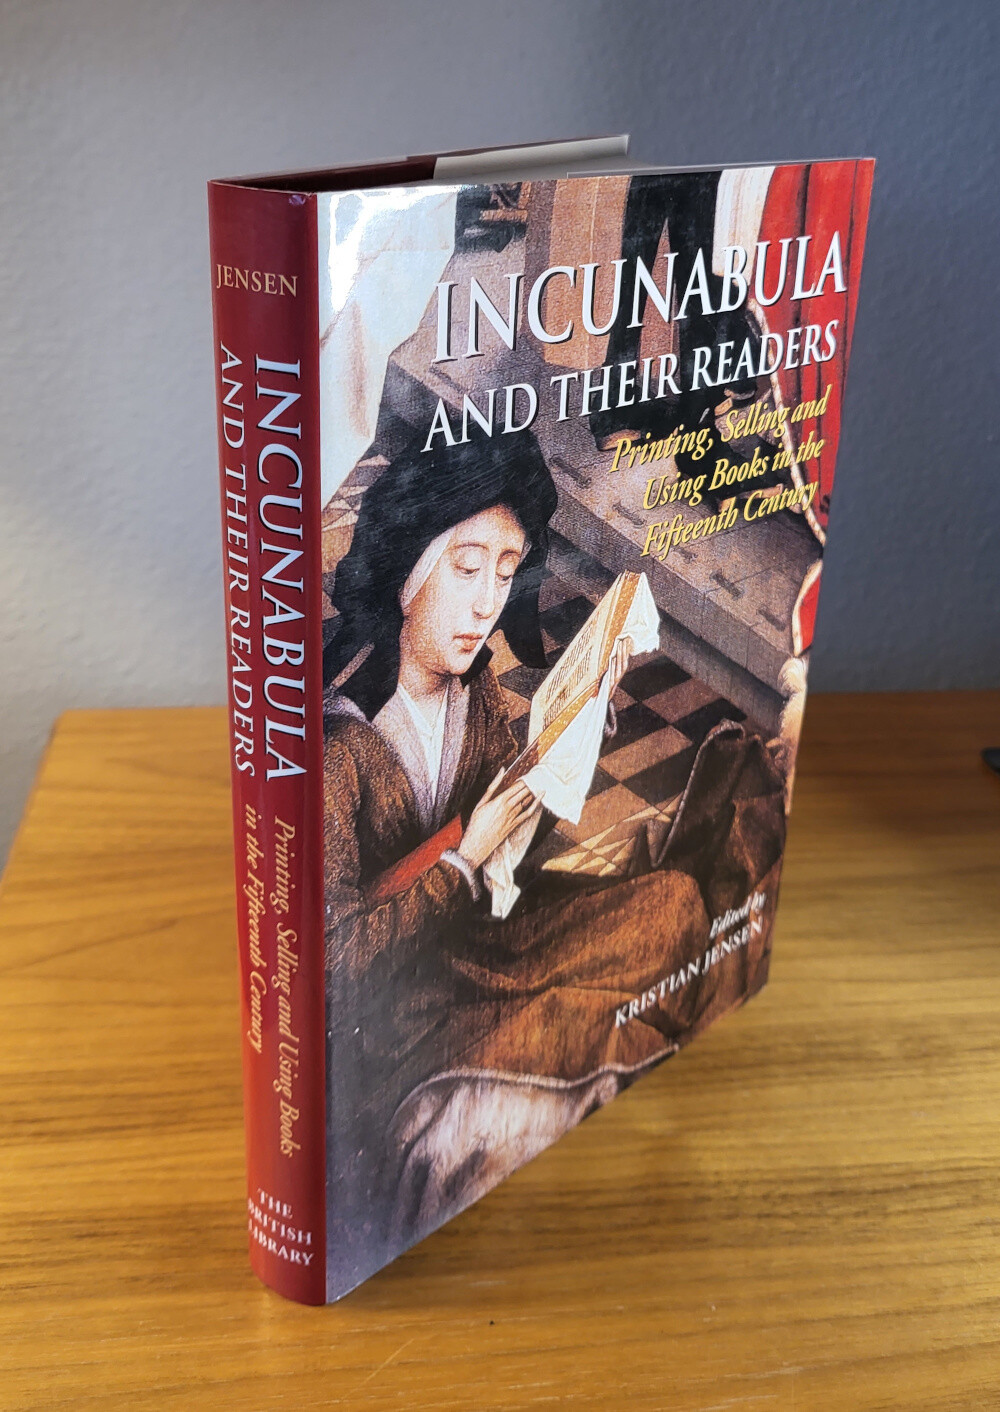 Incunabula and Their Readers: Printing, Selling and Using Books in the Fifteenth Century